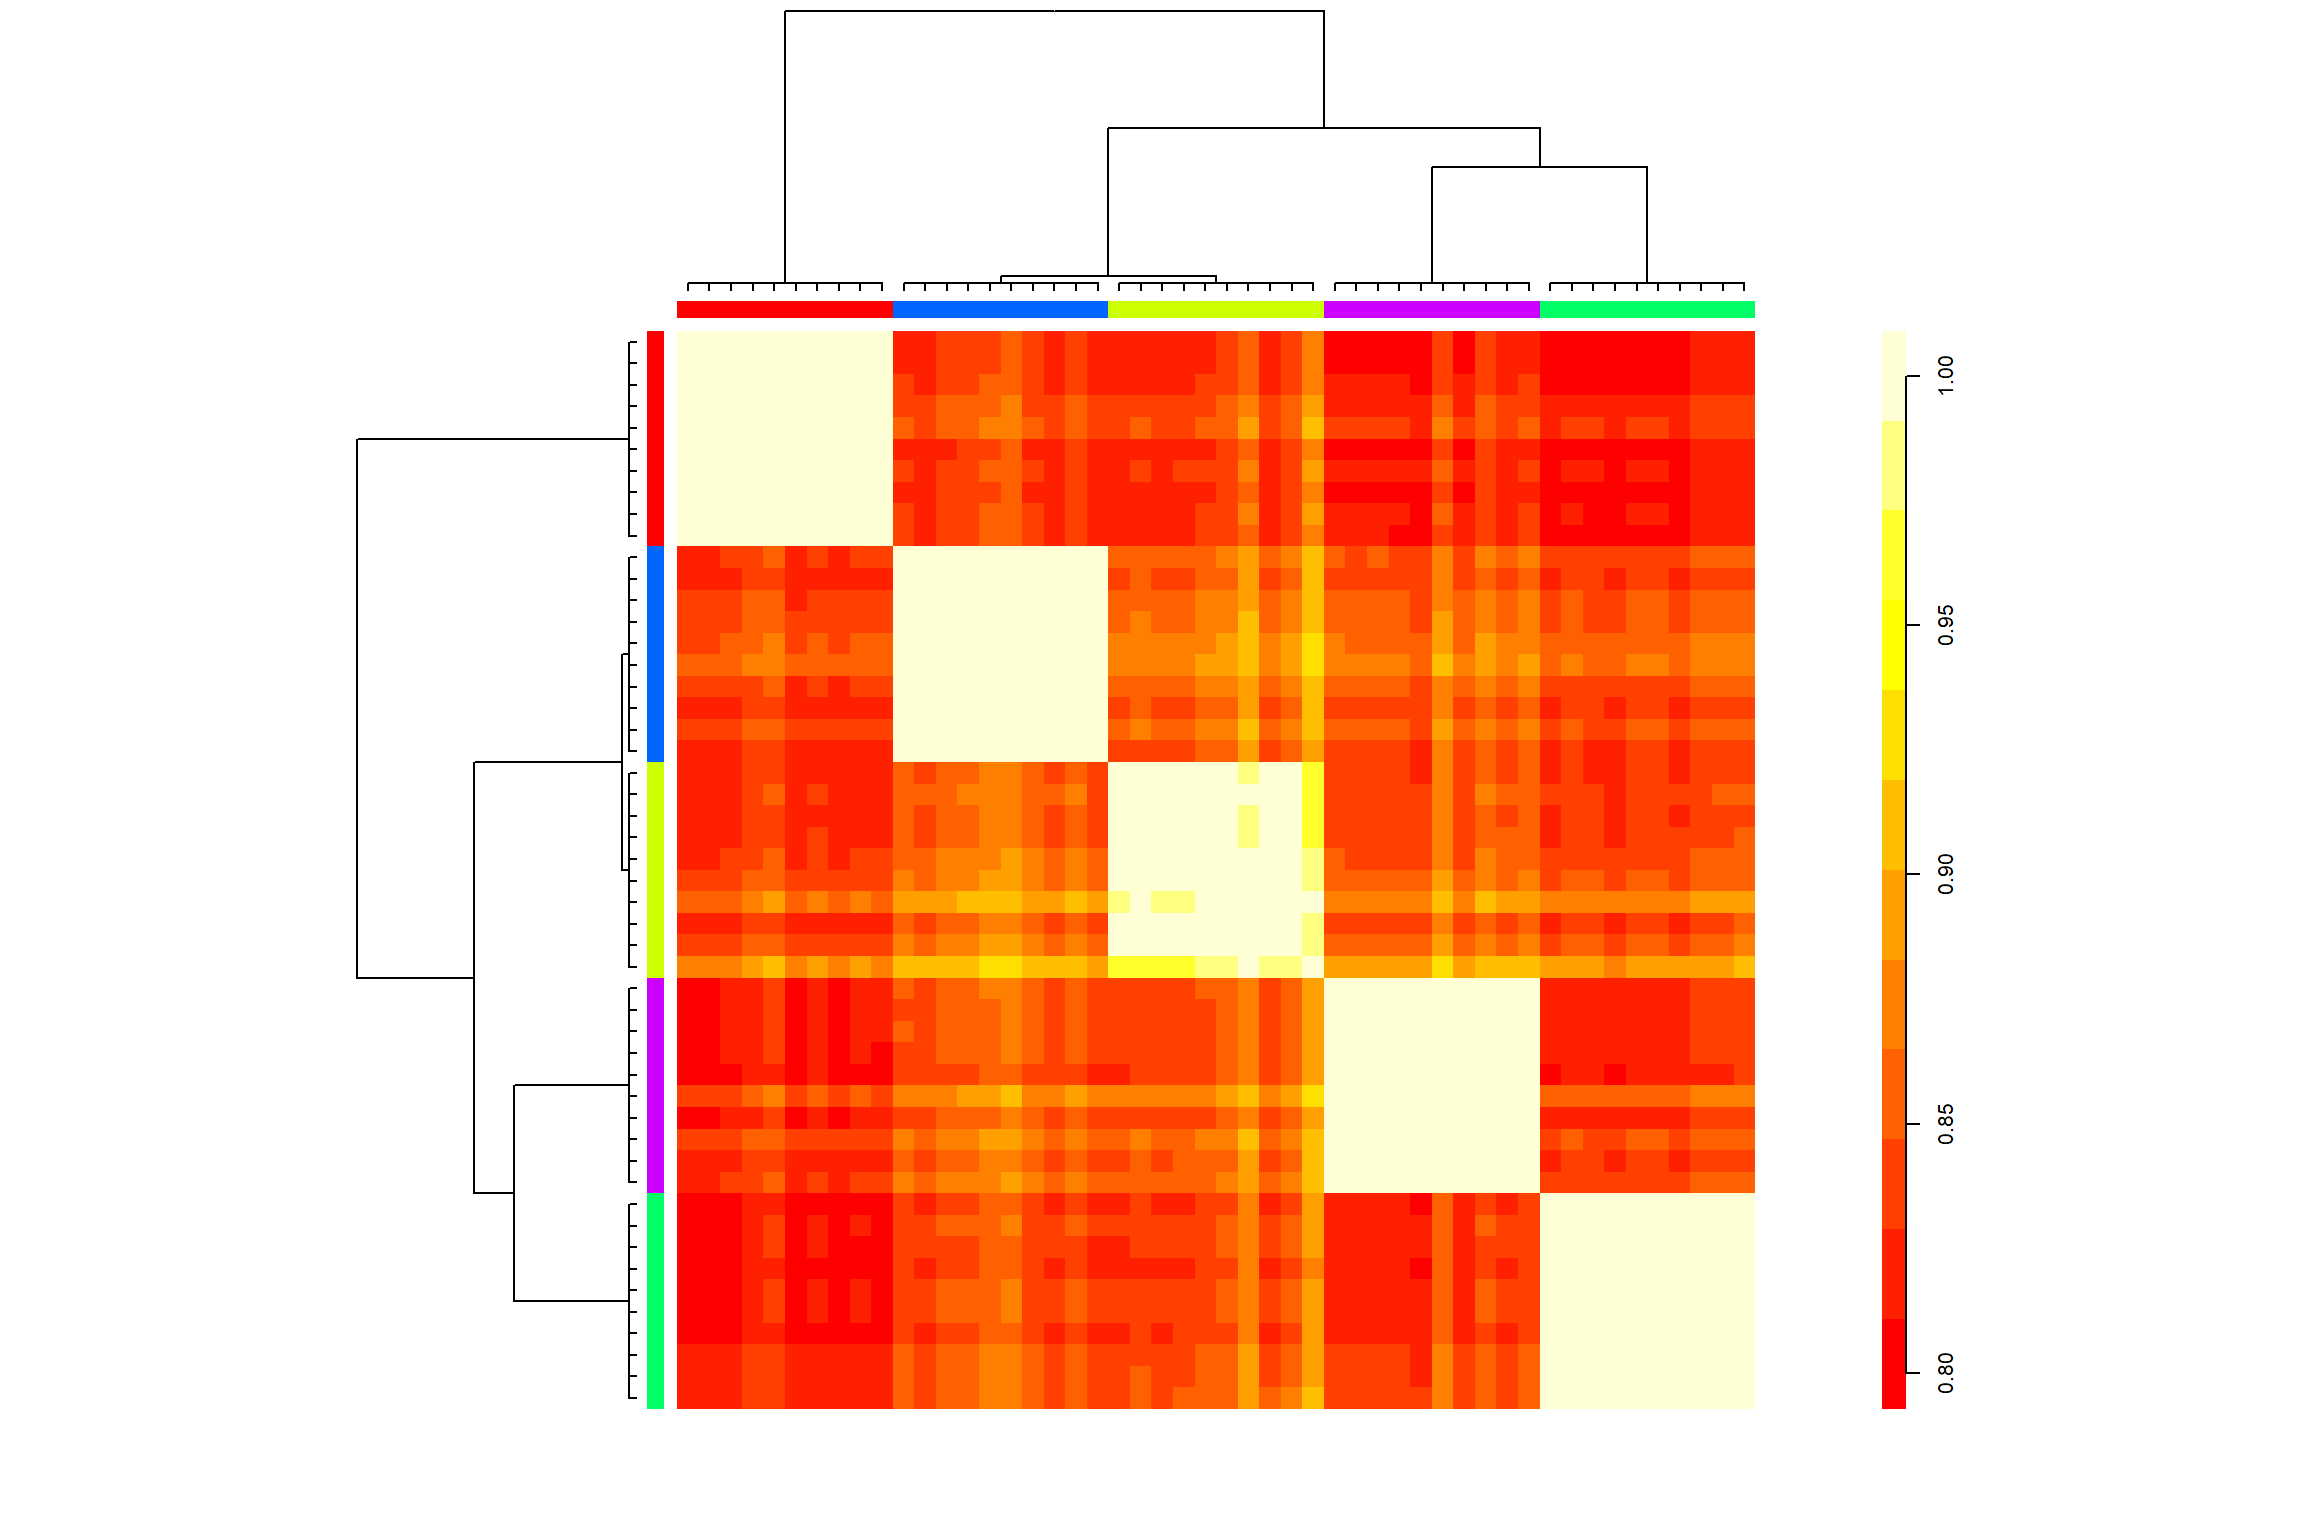 Heatmap obtained by applying APcluster to the example data set